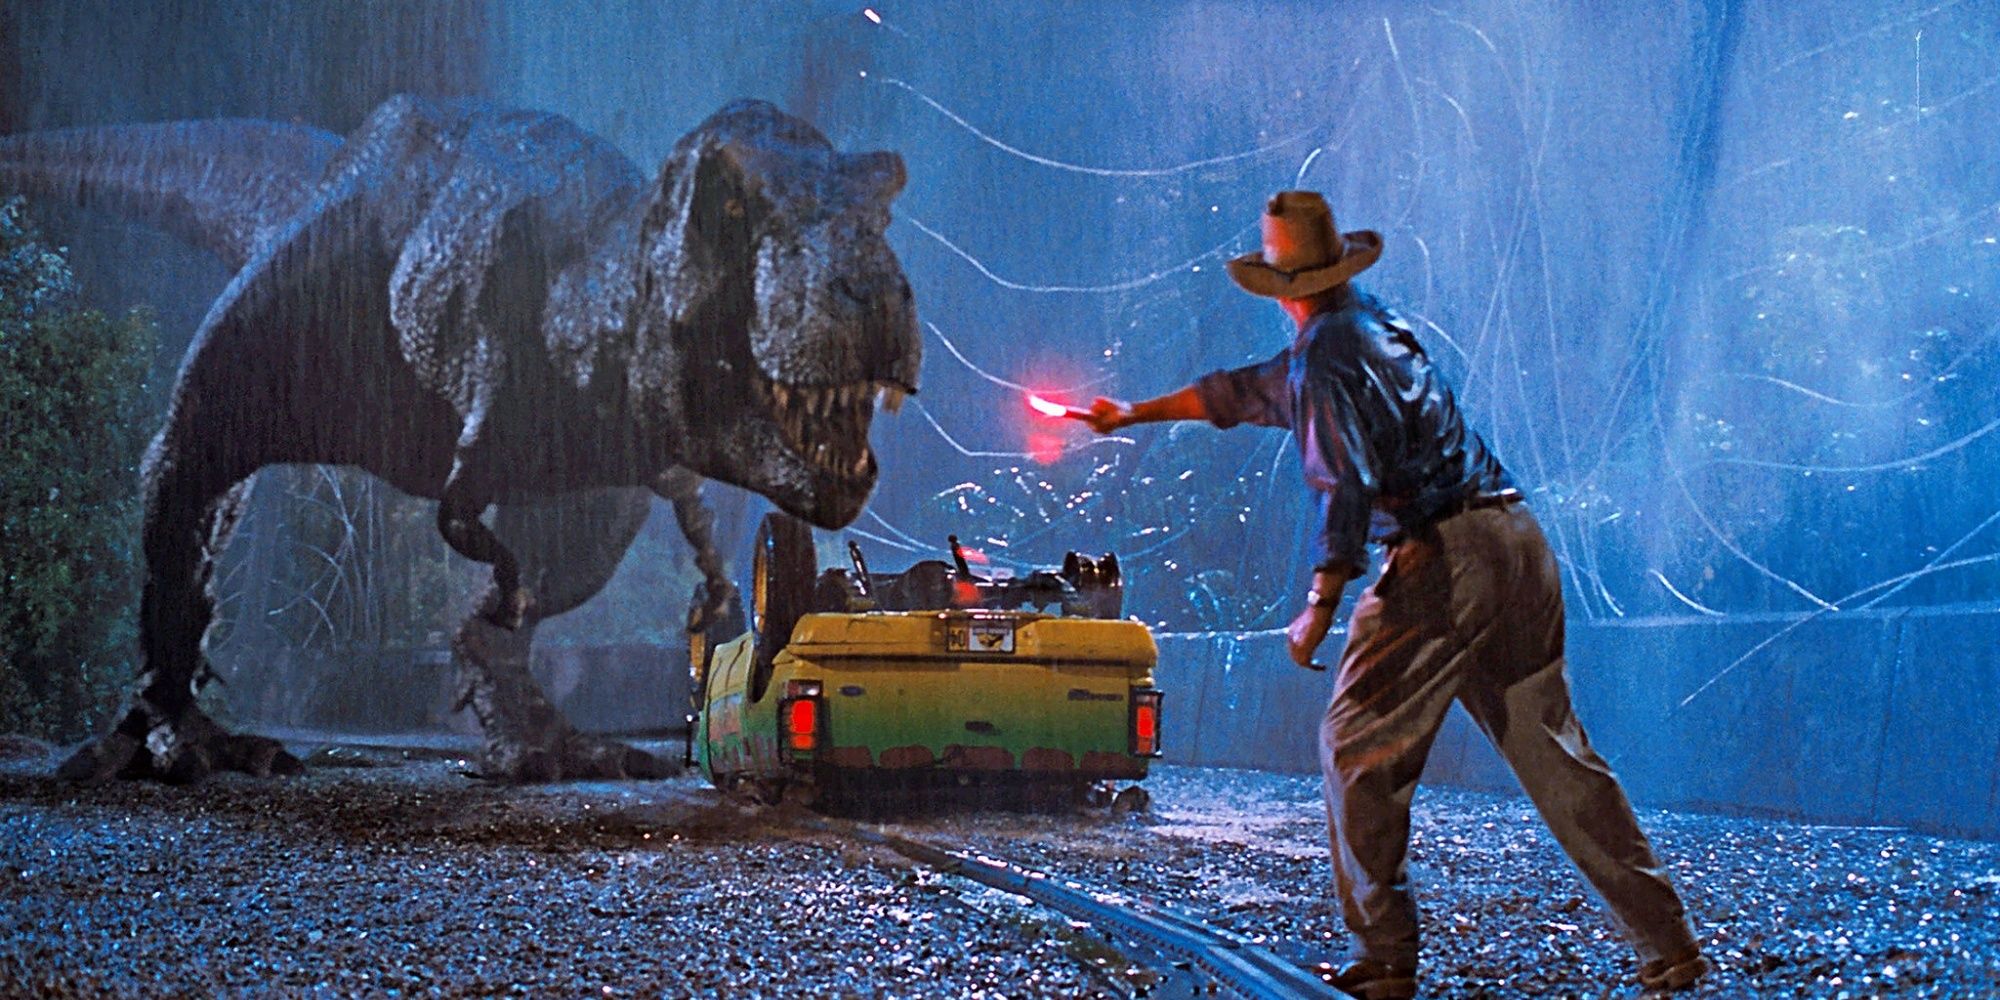 Dr. Alan Grant trying to distract the T-Rex outside the Jeep in Jurassic Park.